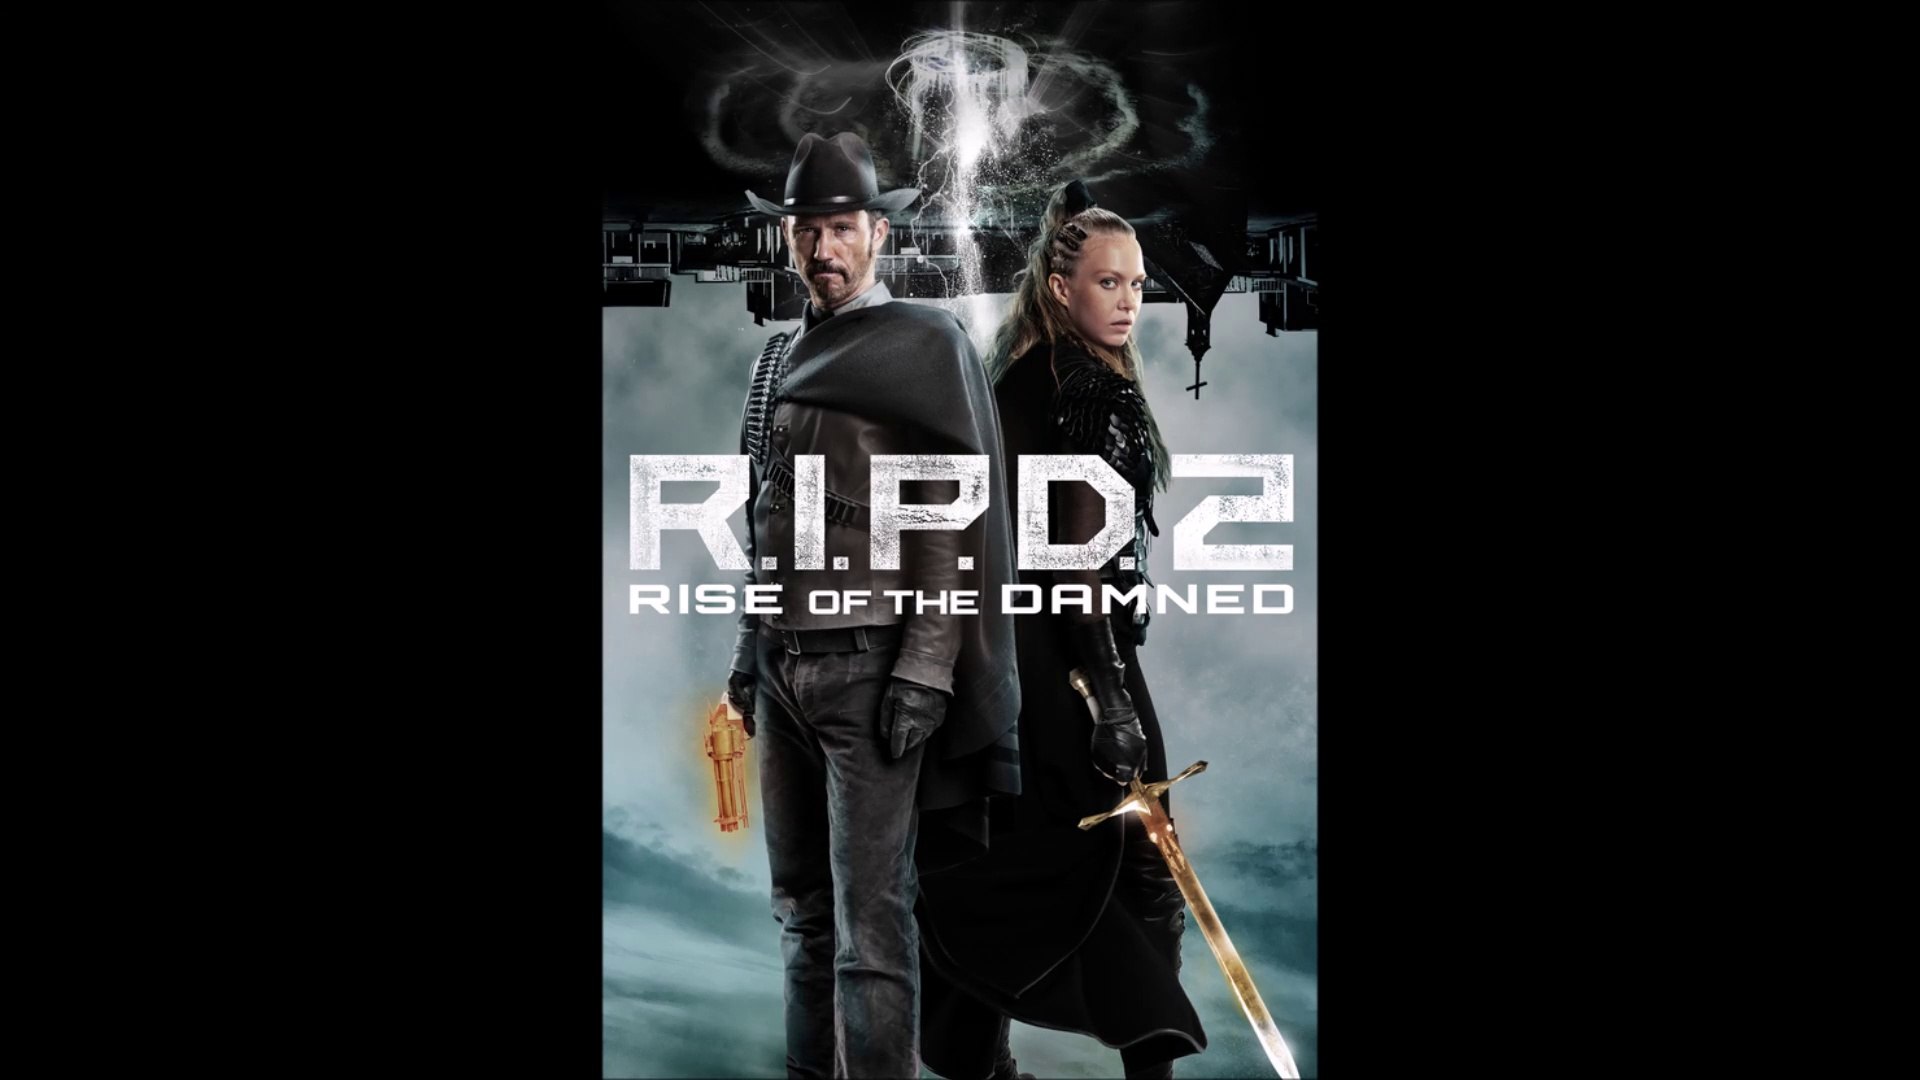 Where Did R.I.P.D. 2: Rise of the Damned Come From?